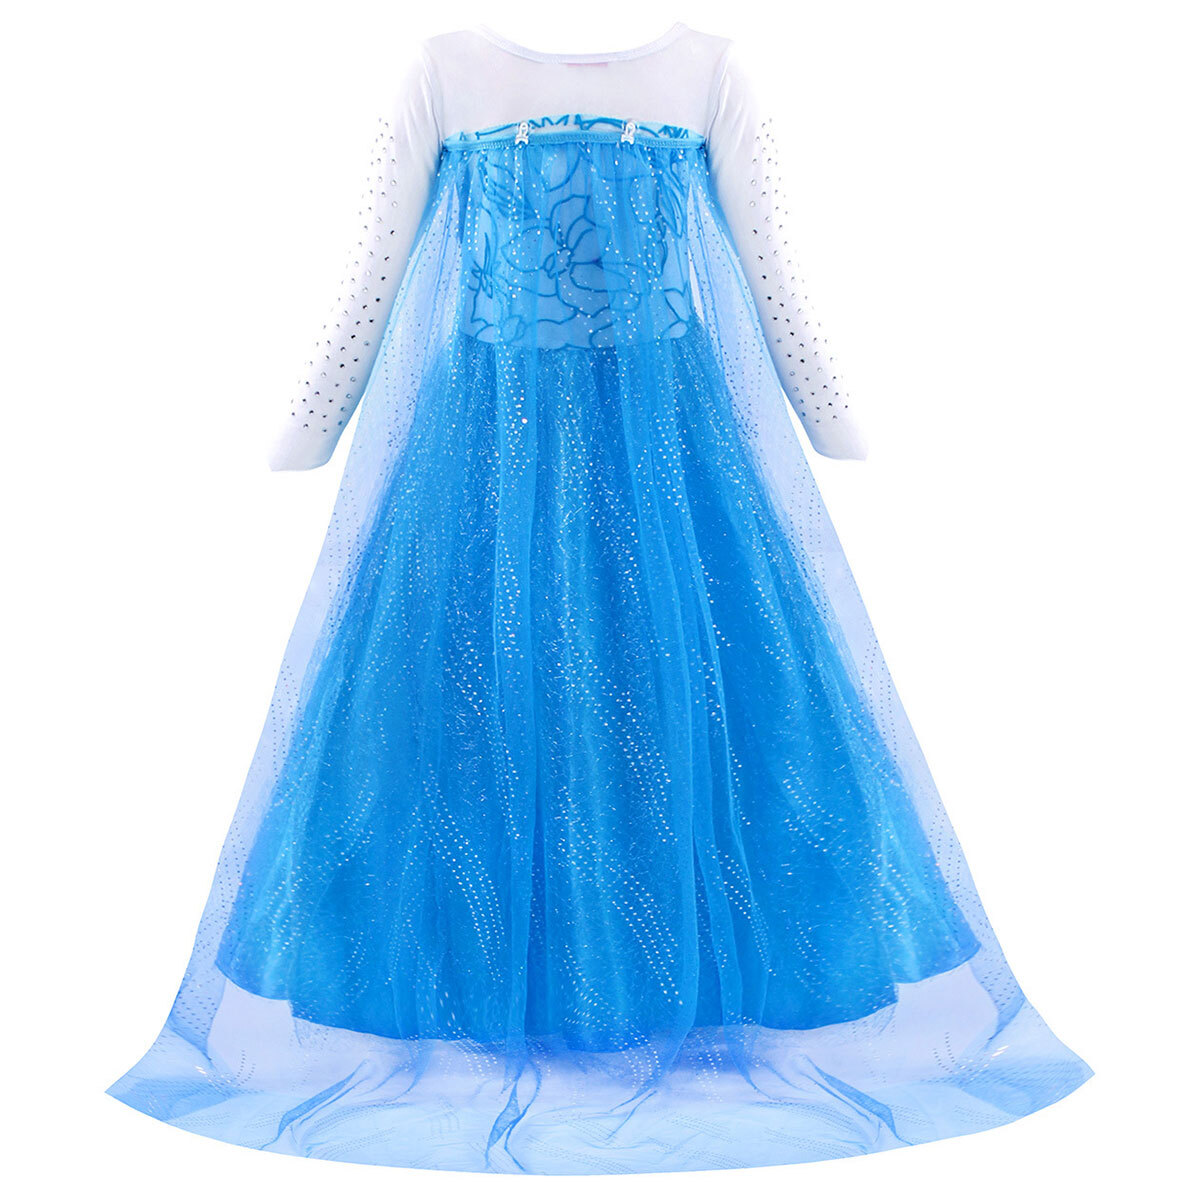 Girls Elsa Dress Snow Queen Princess Costume Party Dress up for 3-9 Year - image 4 of 8